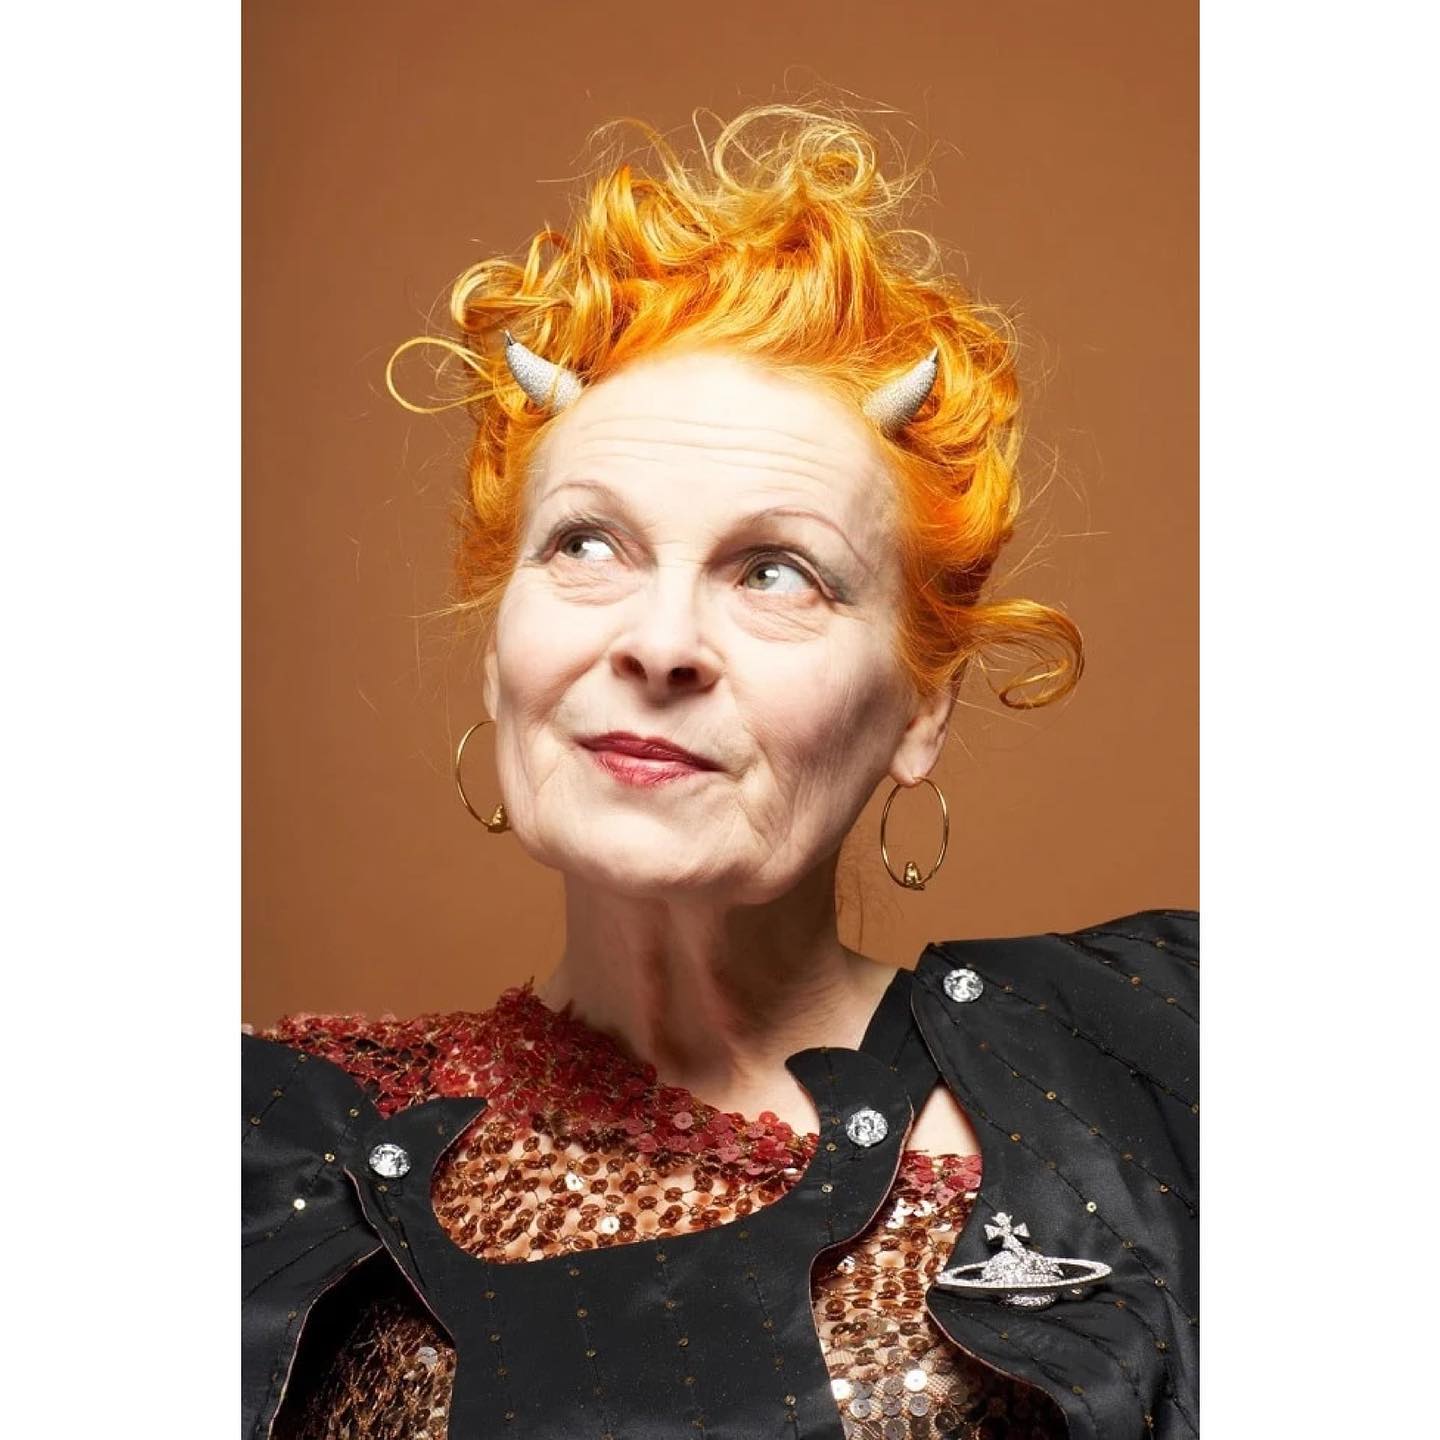 Rest amongst all the galaxies ????Dame Vivienne Westwood????The original punk. I remember our first time meeting in New York. I could not believe I was sipping tea with THE icon. You were unbelievably kind, hilarious, and oh so so incredibly… thoughtful. I had never met a truer individual. I spent most of that afternoon just listening and absorbing. (And your makeup has always been and always will be unmatched.) Forever inspiring us through your activism and endless creativity. Daring to disrupt and daring to be yourself 100% of the time. The world is better because it knew you. ♻️♻️????♻️????♻️♻️????♻️ all my love is with your Andreas and family❤️